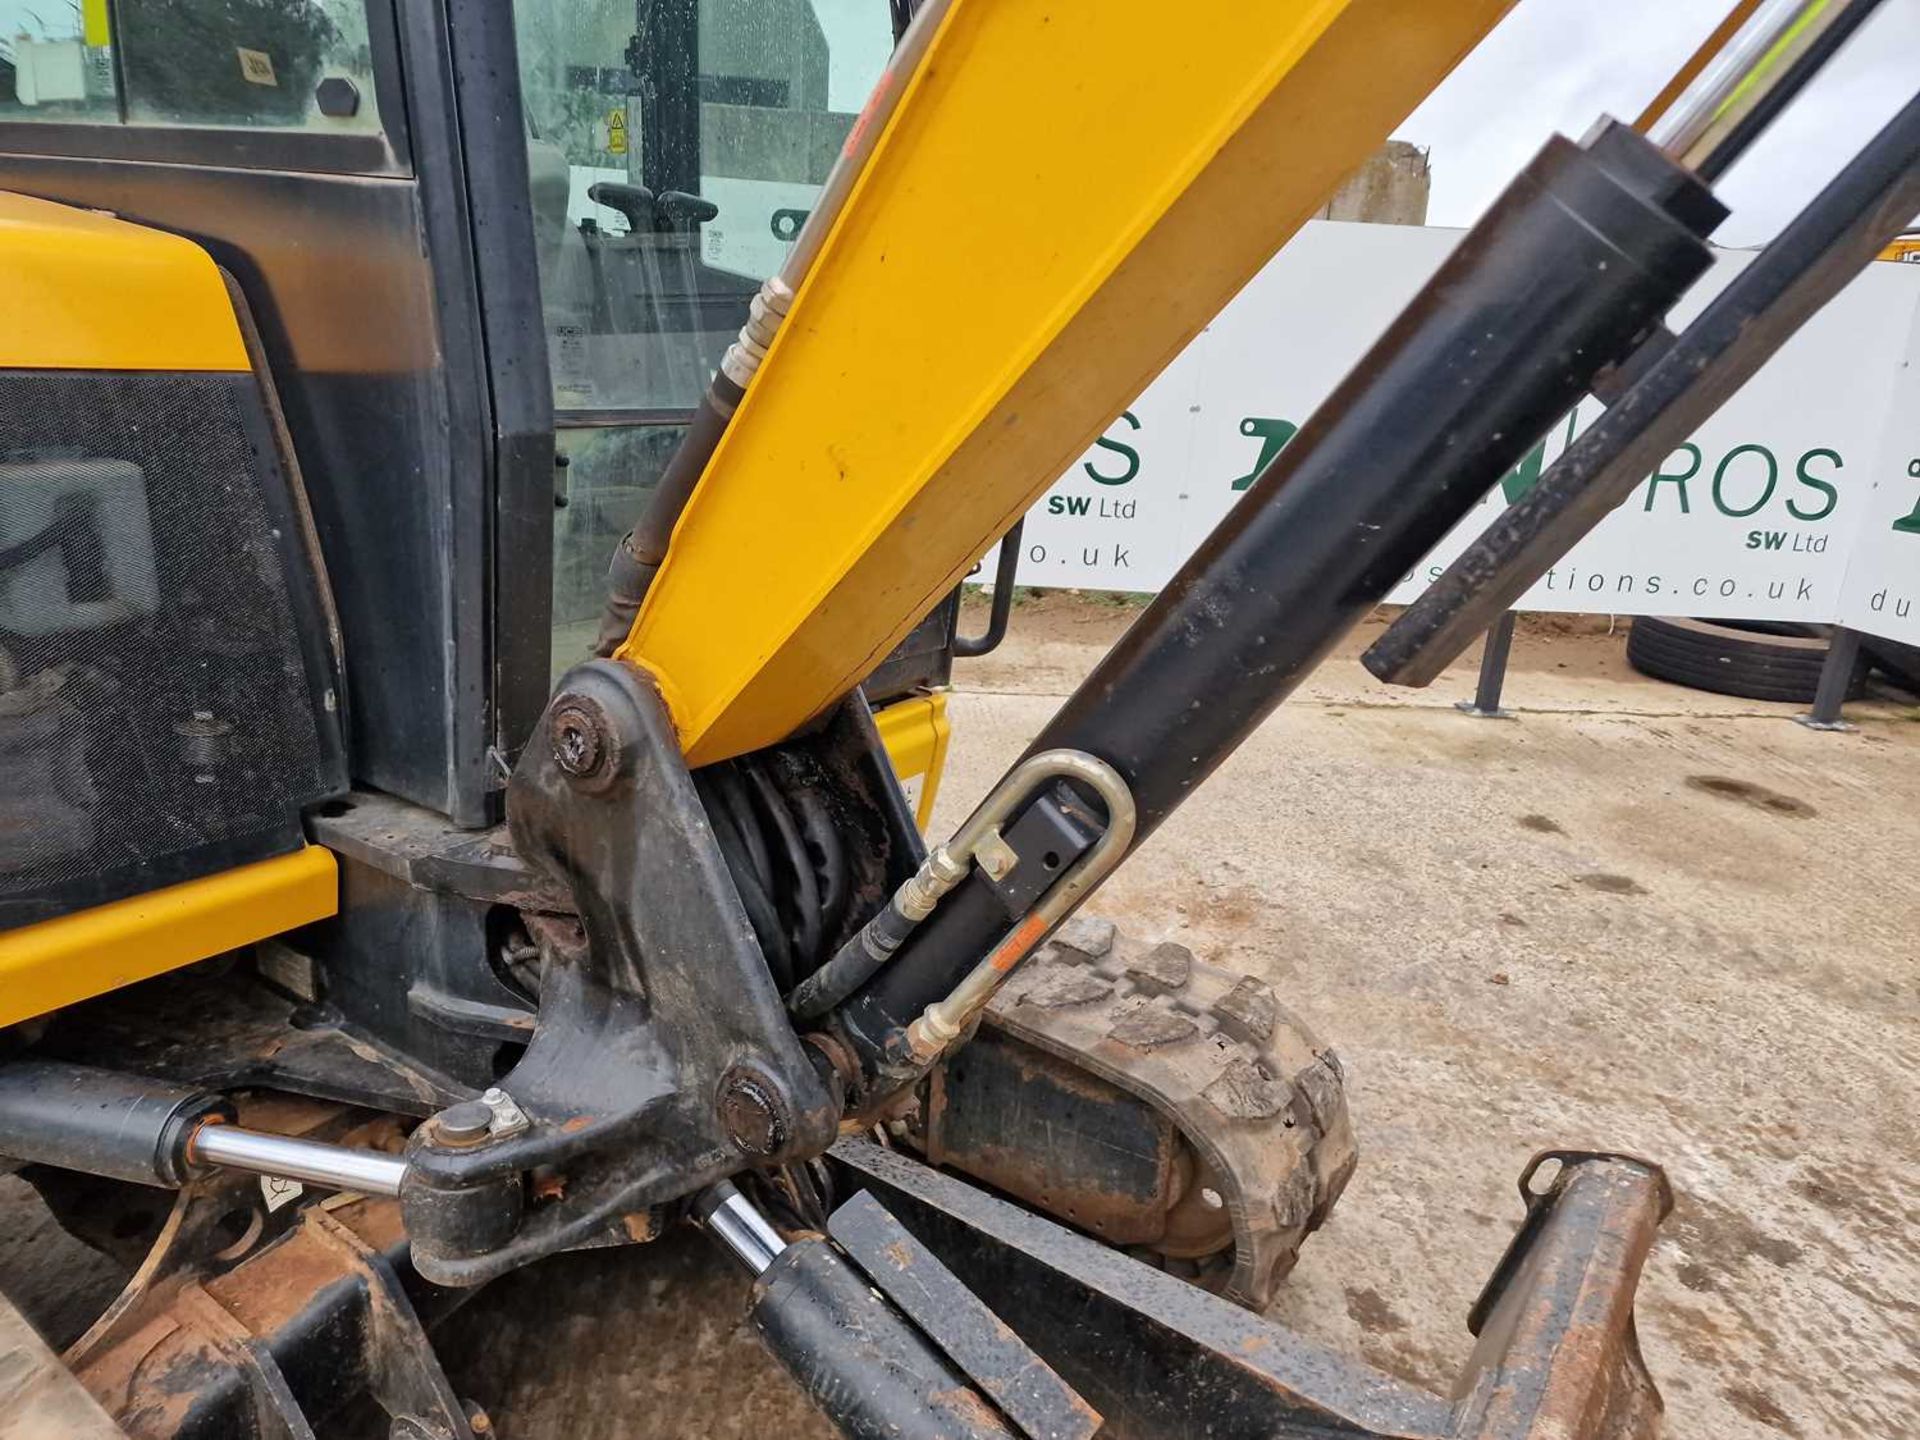 2017 JCB 57C-1 Rubber Tracks, Blade, Offset, JCB Hydraulic QH, Piped, 72", 30", 18" Bucket - Image 13 of 38